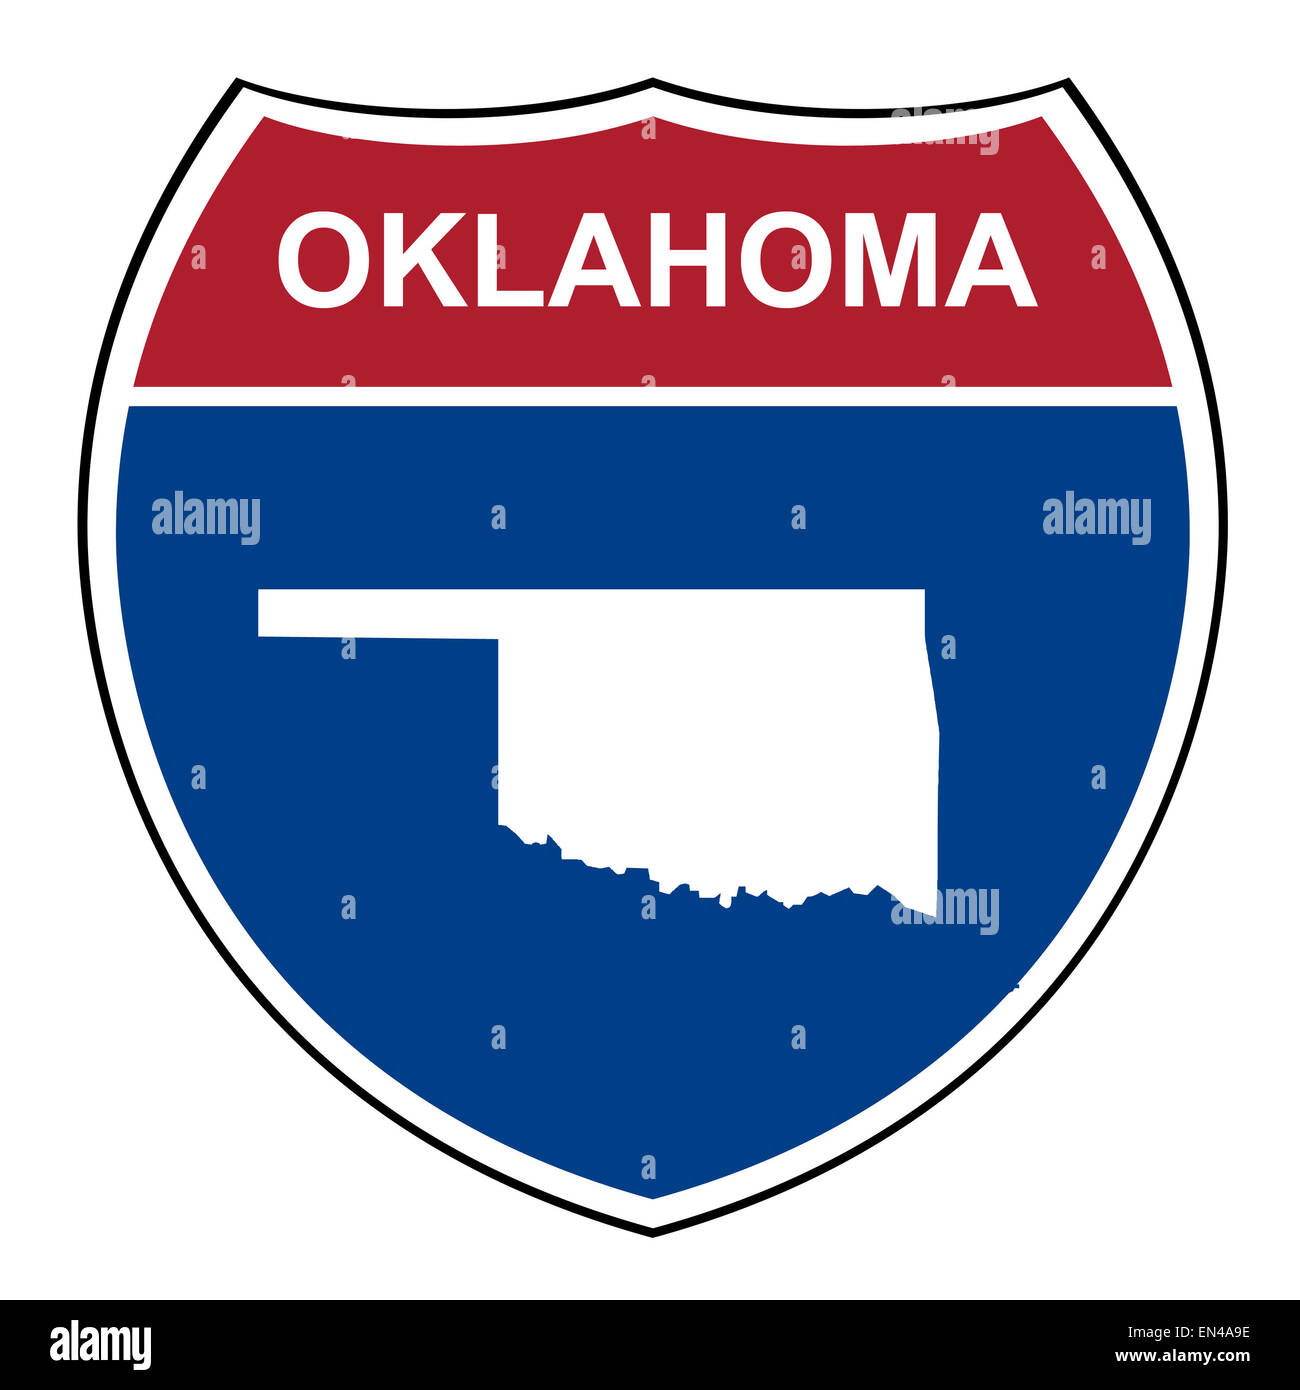 Oklahoma interstate highway road shield isolated on a white background. Stock Photo